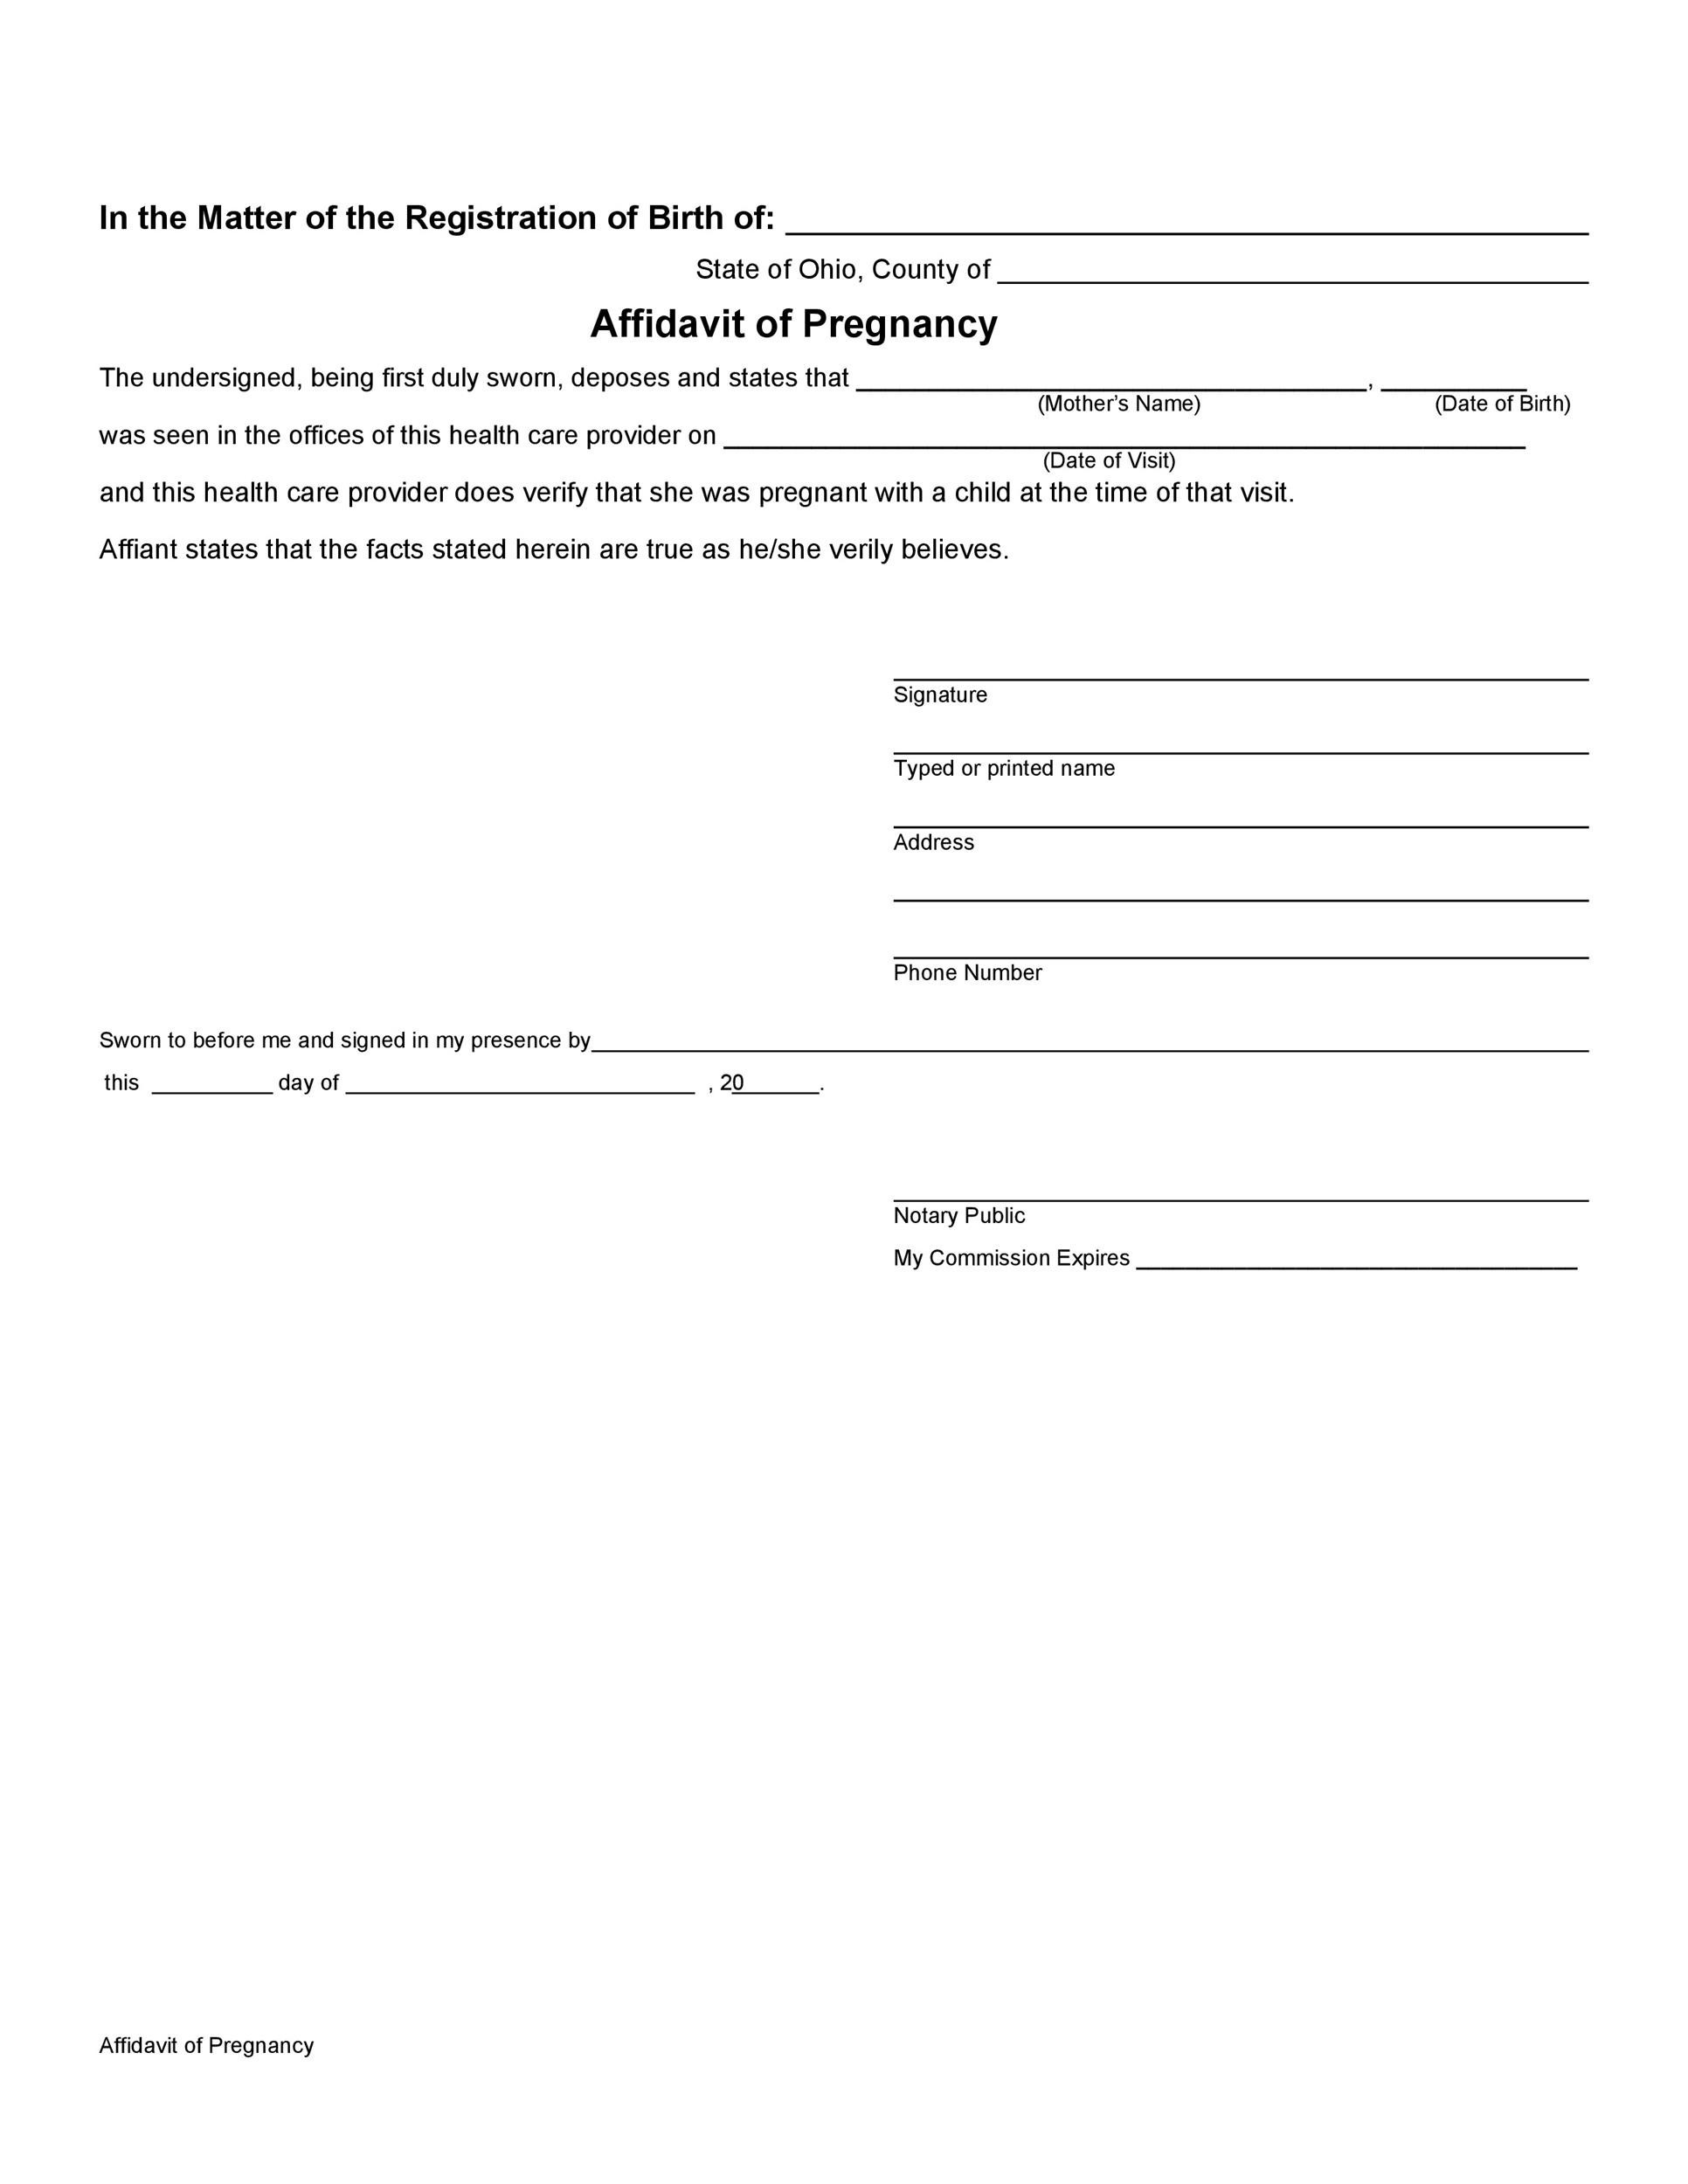 Free pregnant papers 23